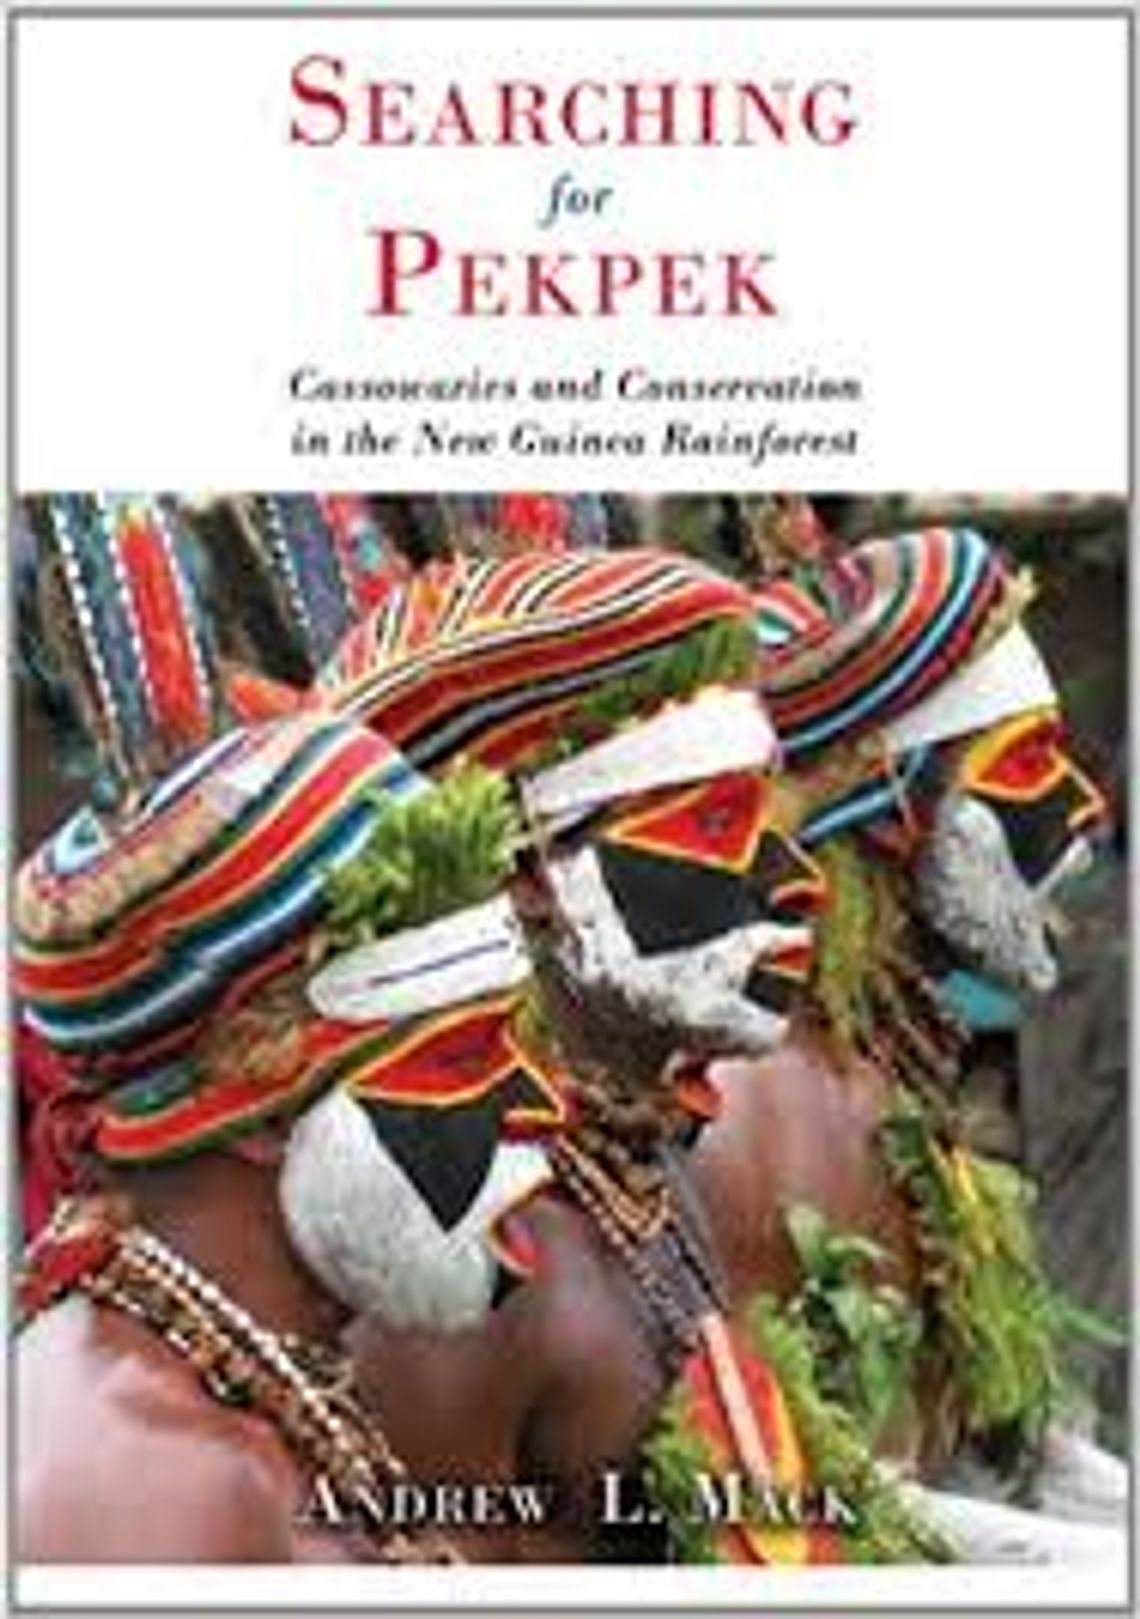 Book Review - Searching for Pekpek: Cassowaries and Conservation in the New Guinea Rainforest